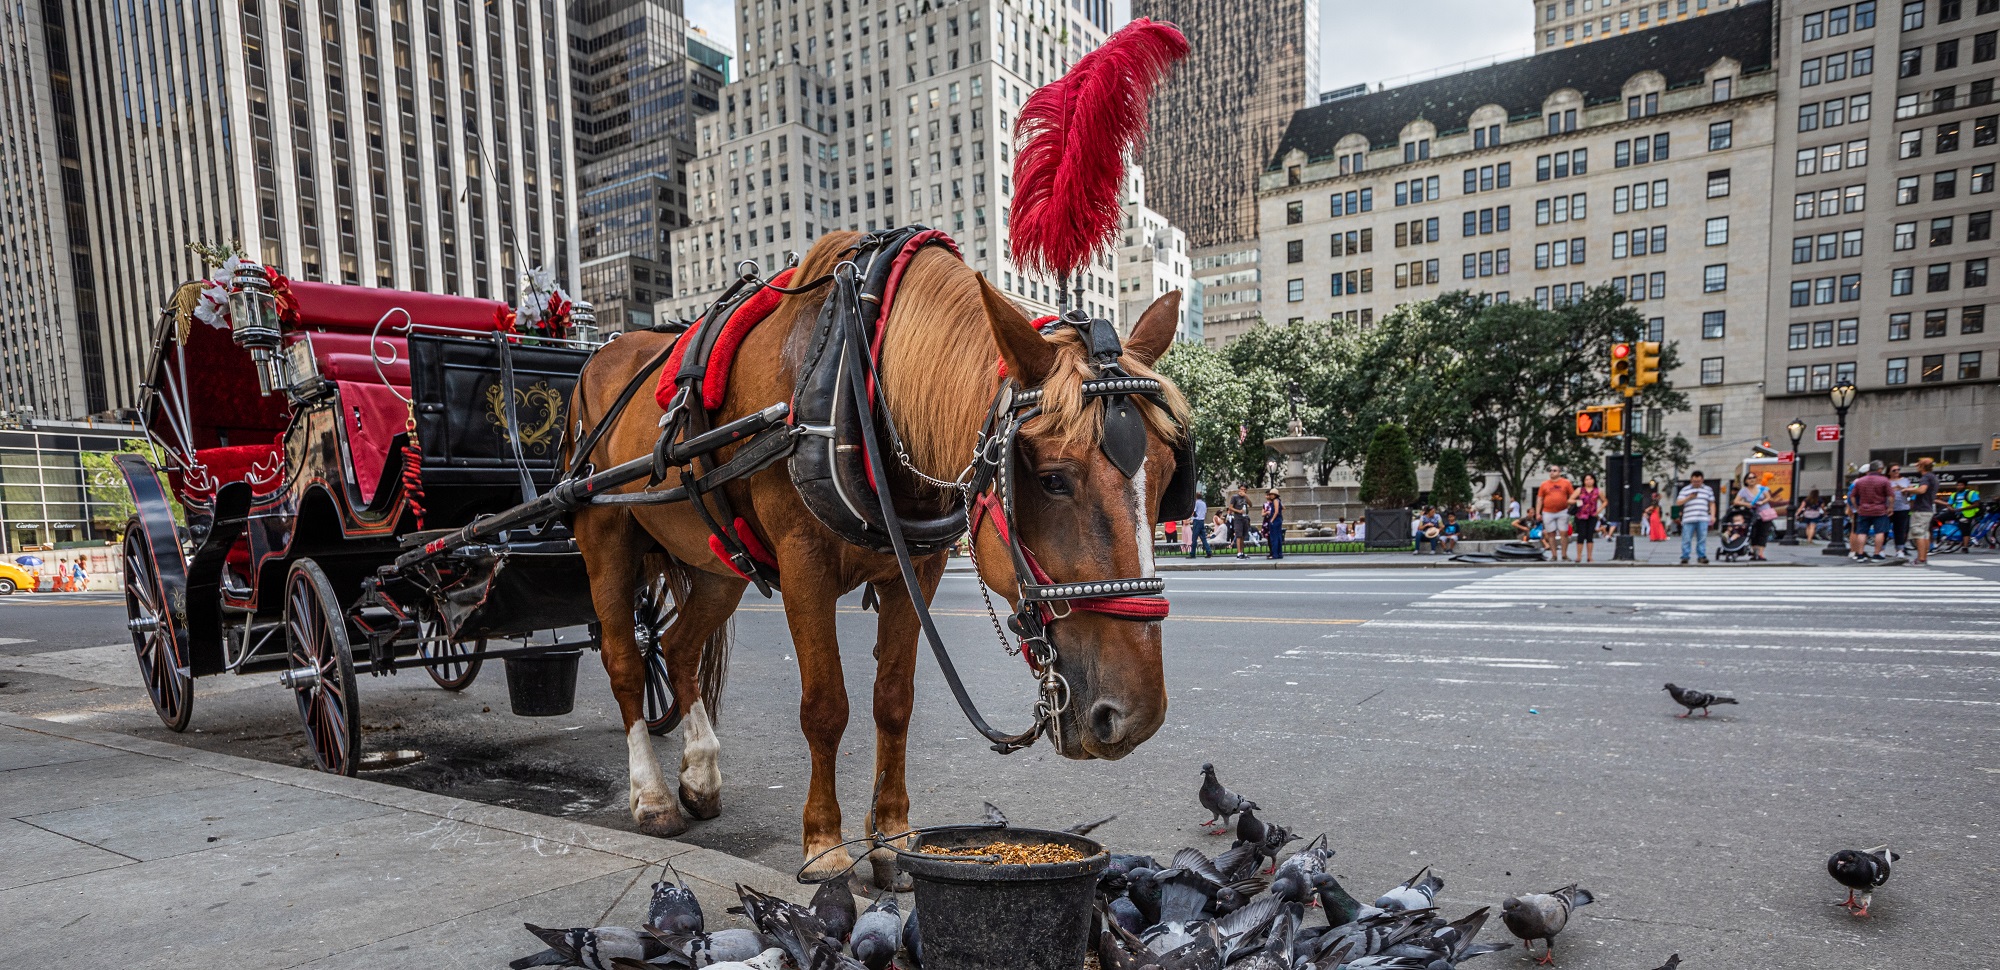 Image shows horse in New York City